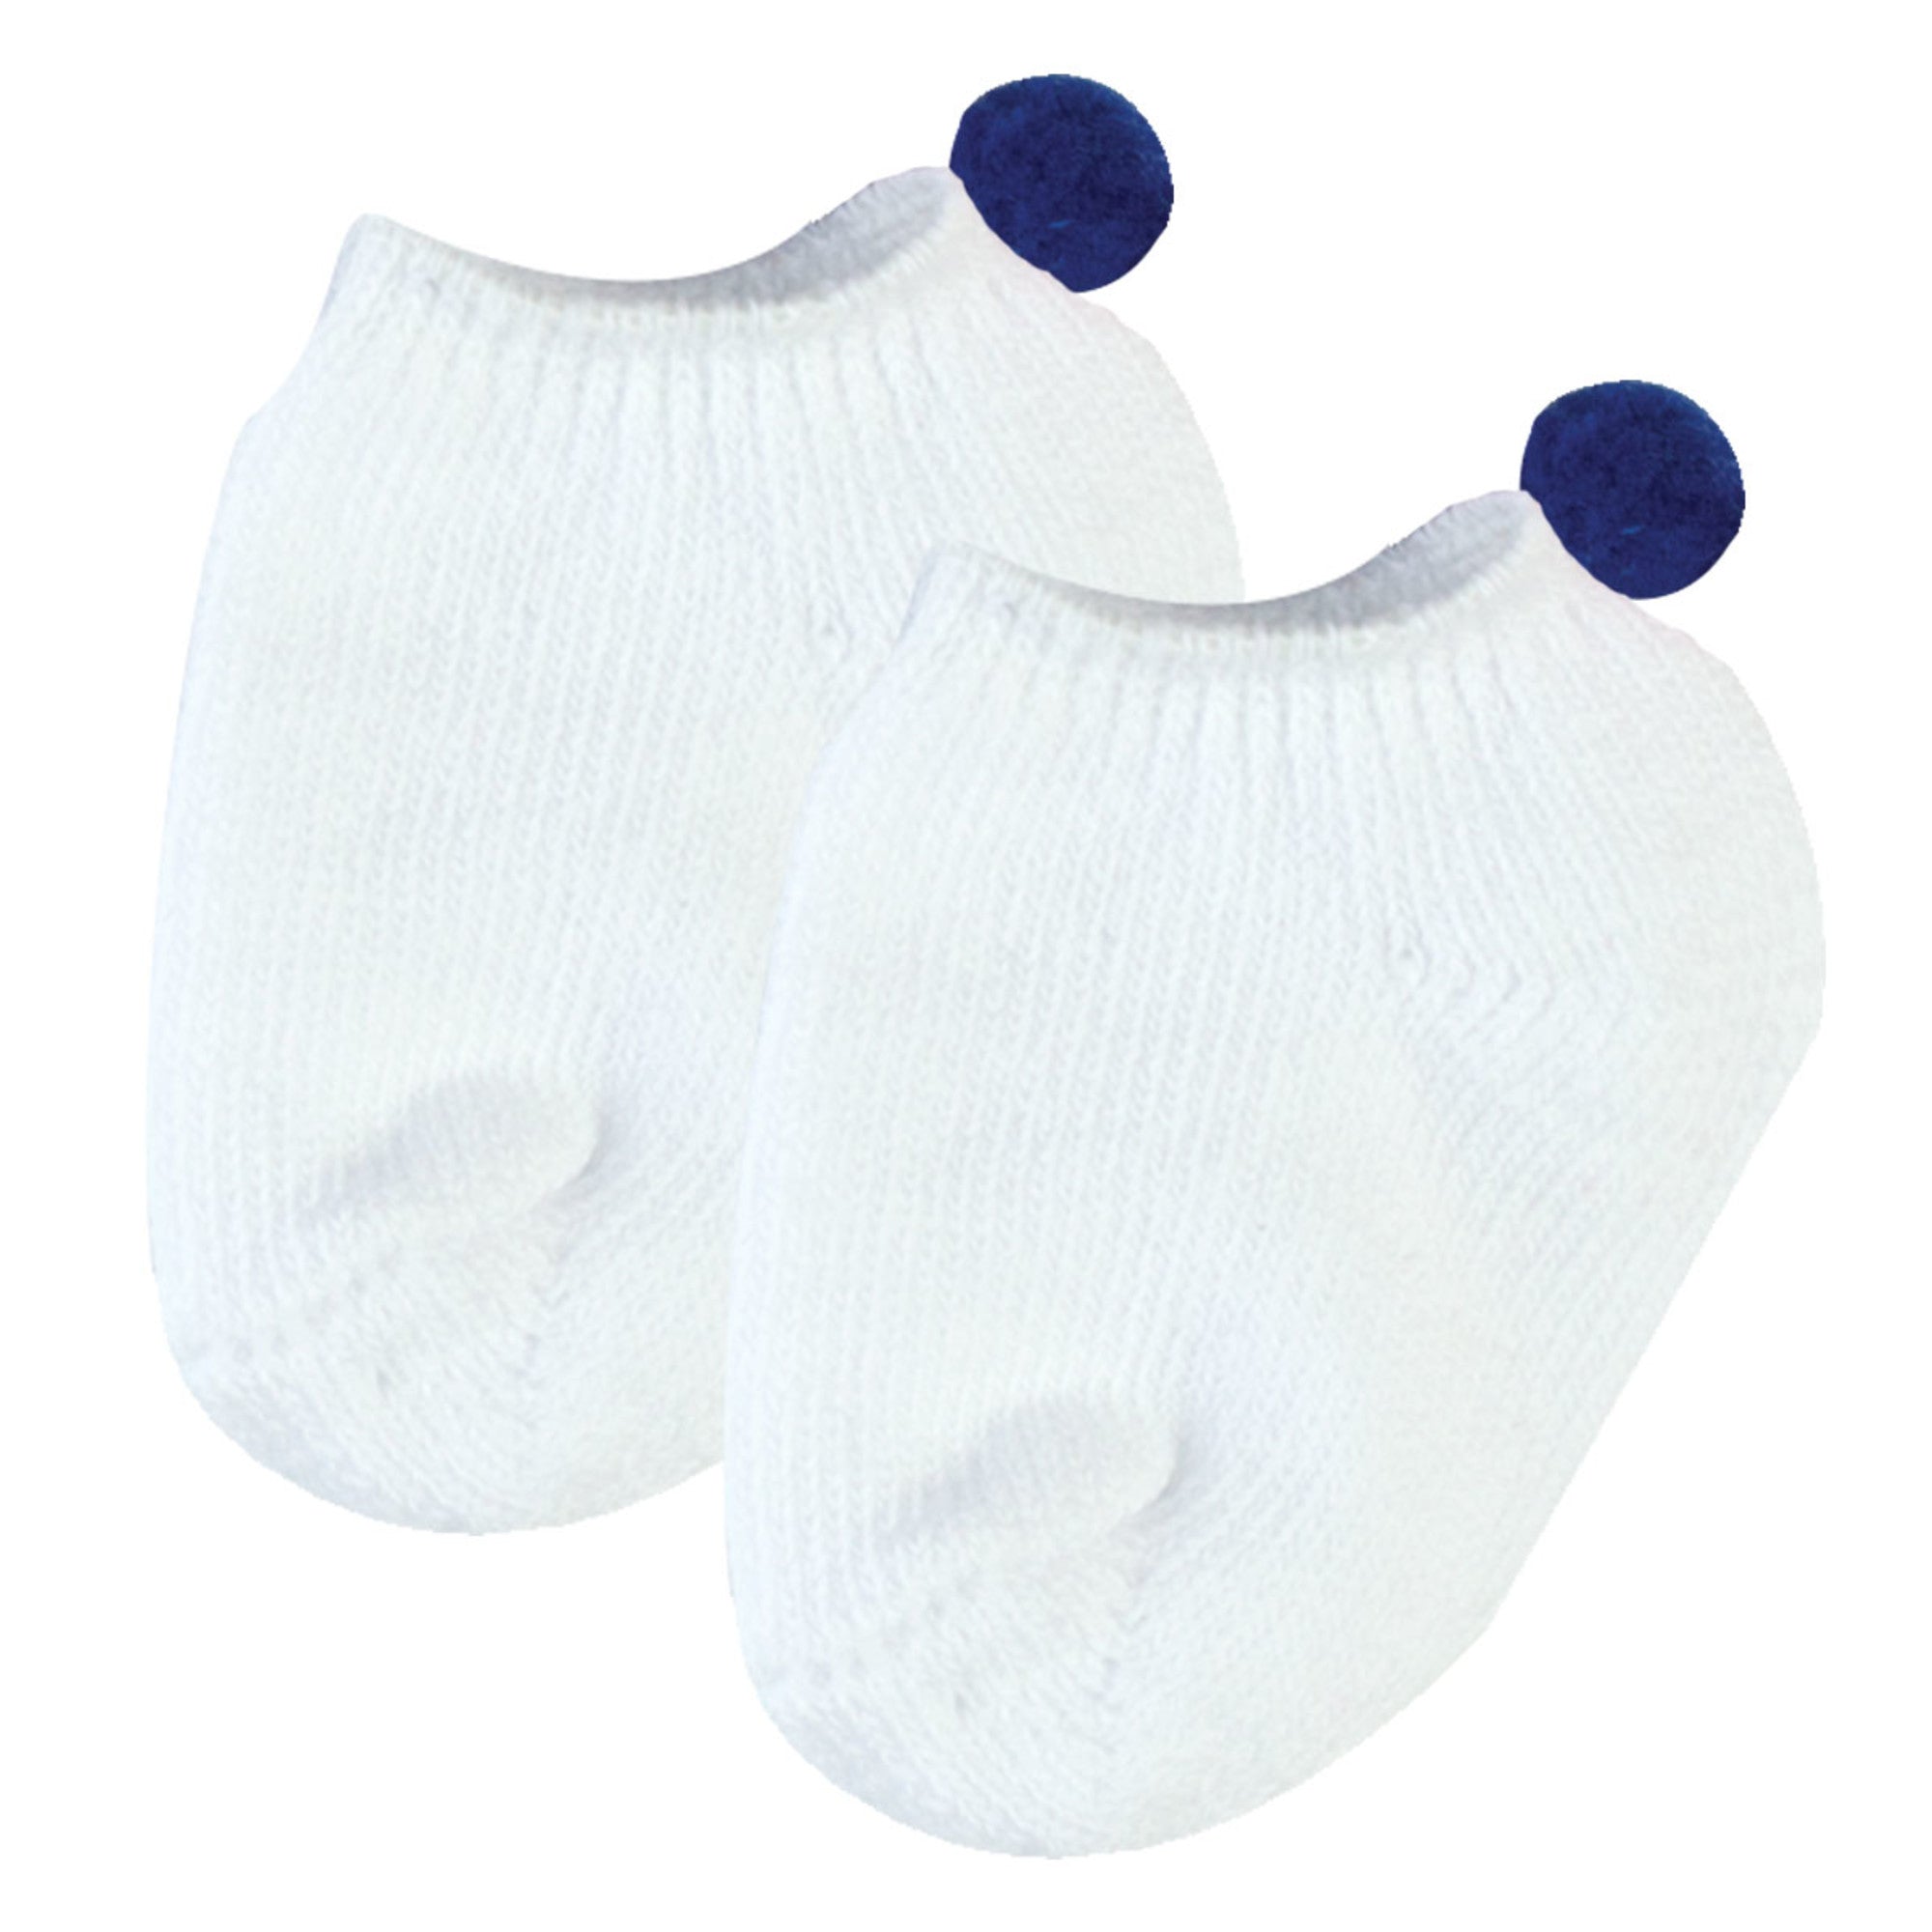 Sophia’s Mix & Match Wardrobe Essentials Basic Solid-Colored Ankle Socks with Pom-Poms for 18” Dolls, White/Navy Blue